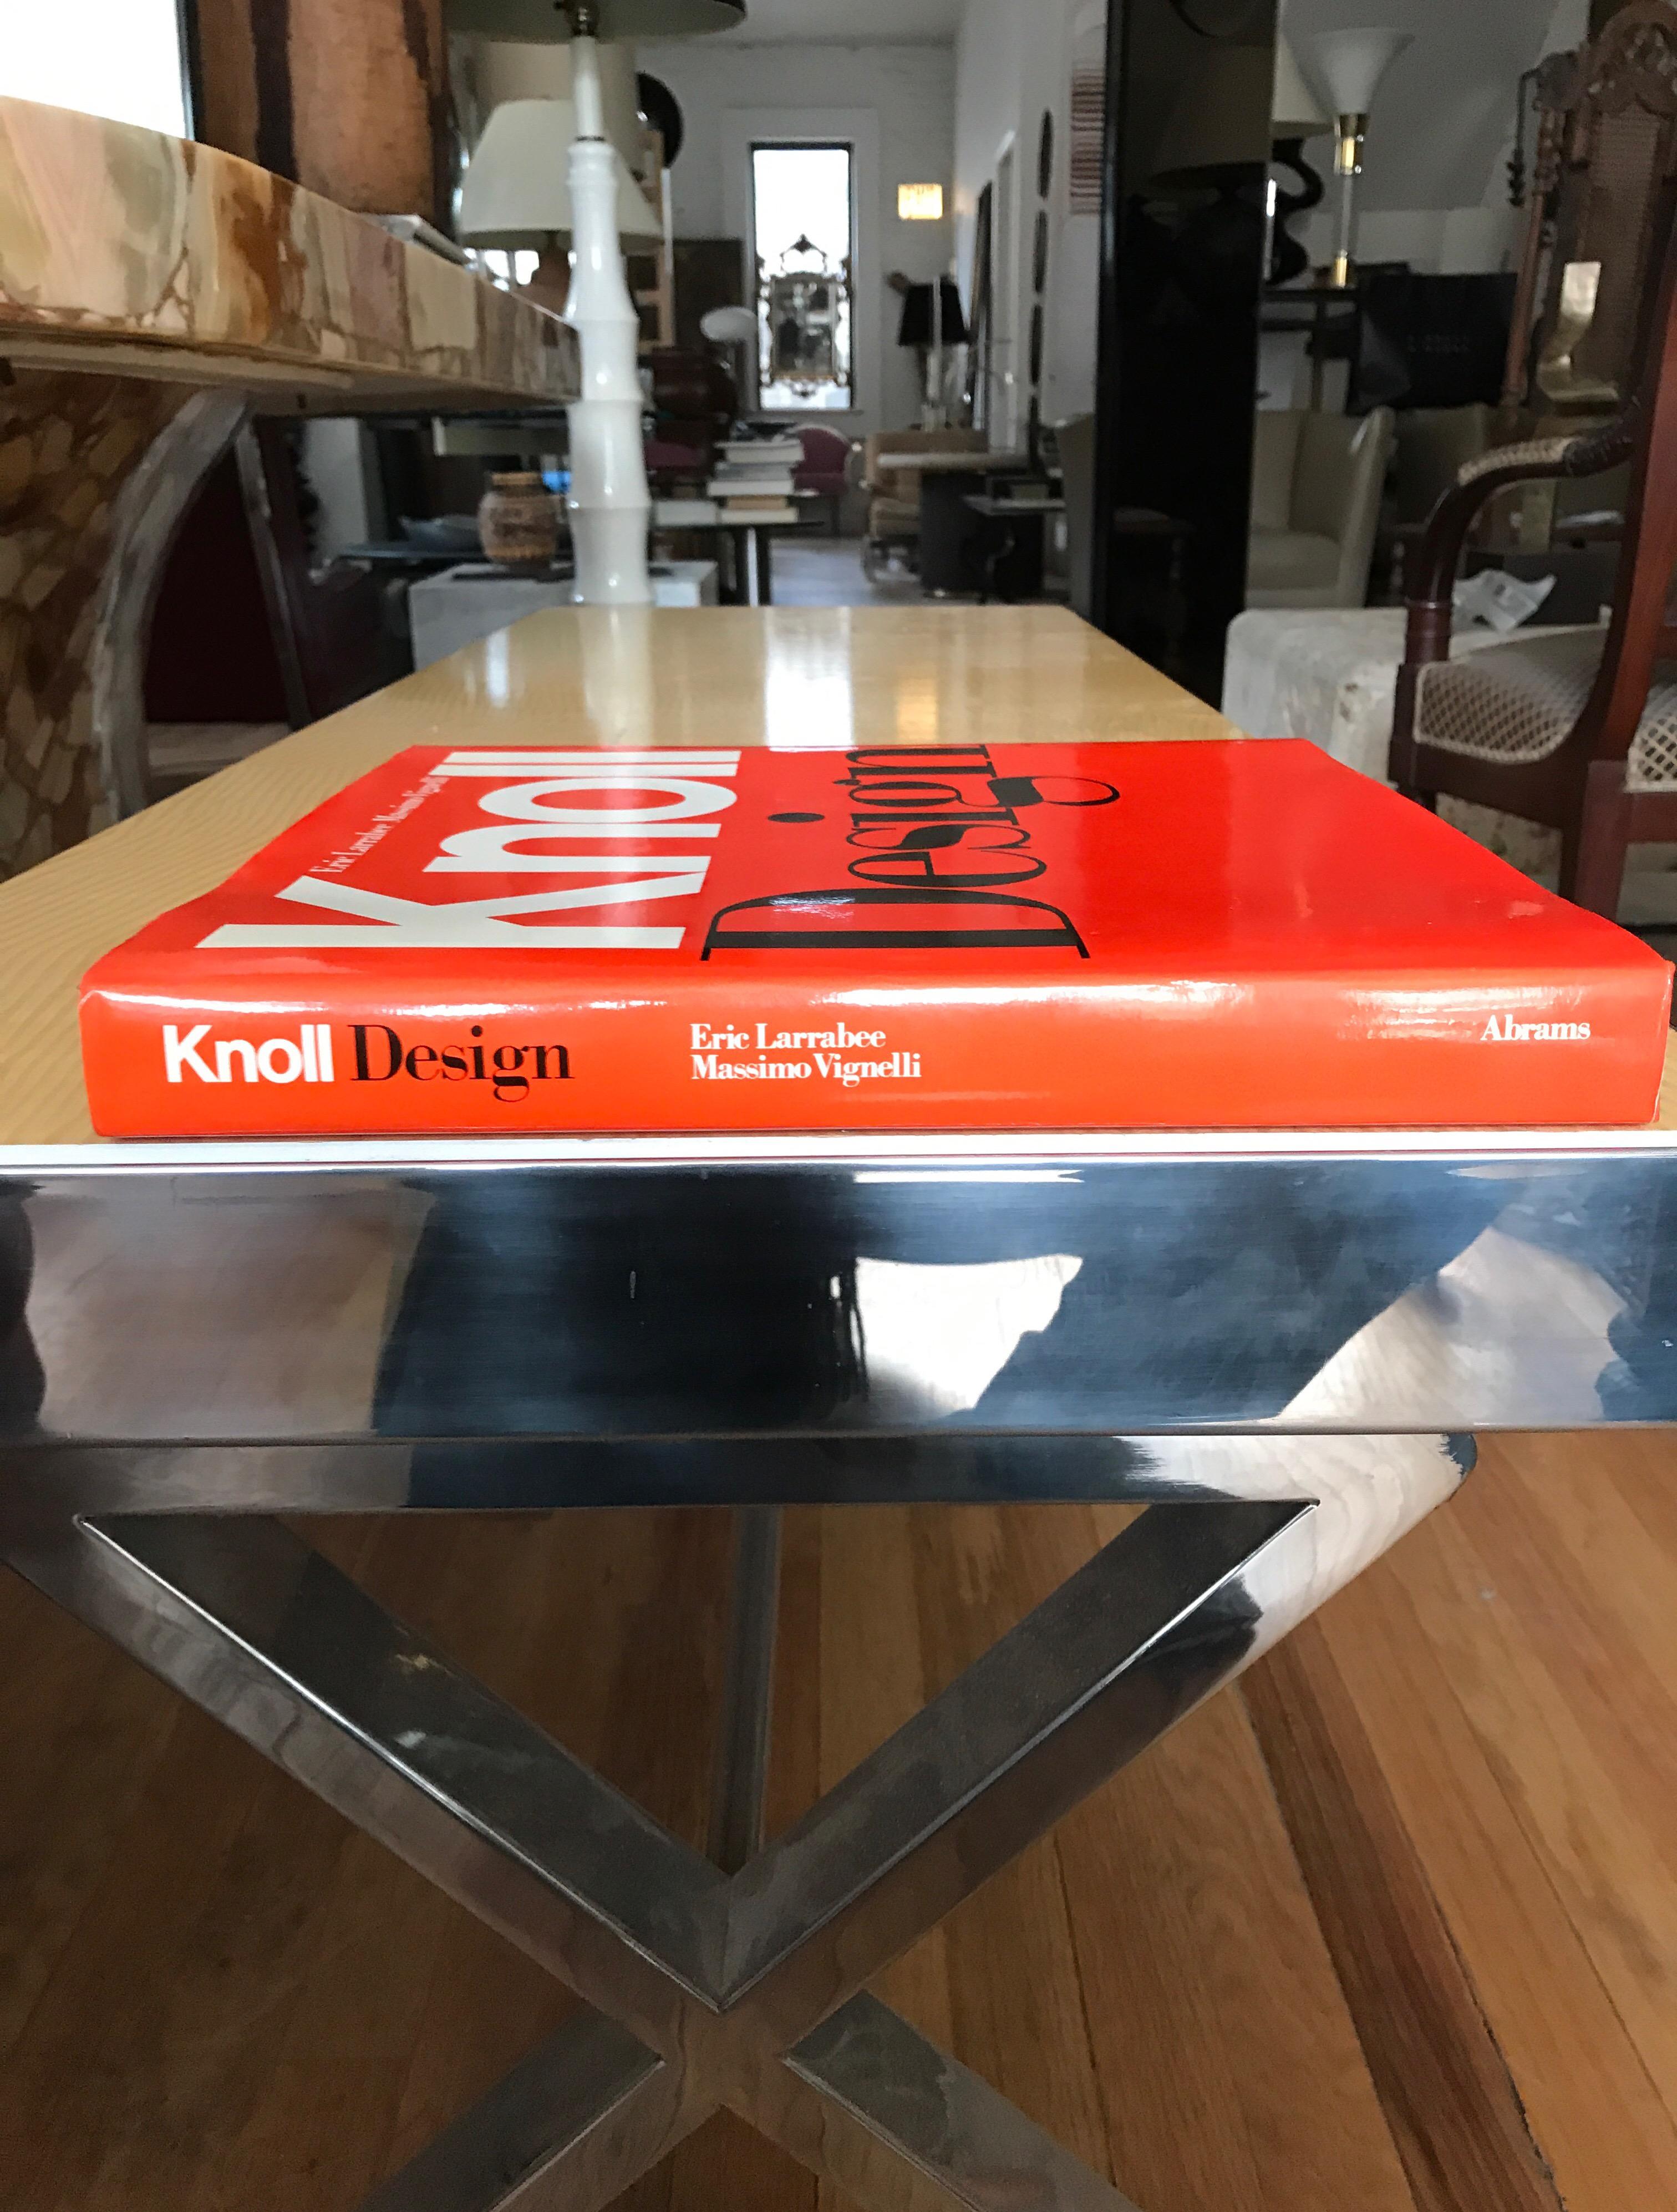 Knoll Design by Eric Larrabee and Massimo Vignelli is a handsome
portrait of some of the talented group of people who have designed
for Knoll over the years. Those profiled include Marcel Breuer, Harry Bertoia,
Florence Knoll, Eero Saarinen and